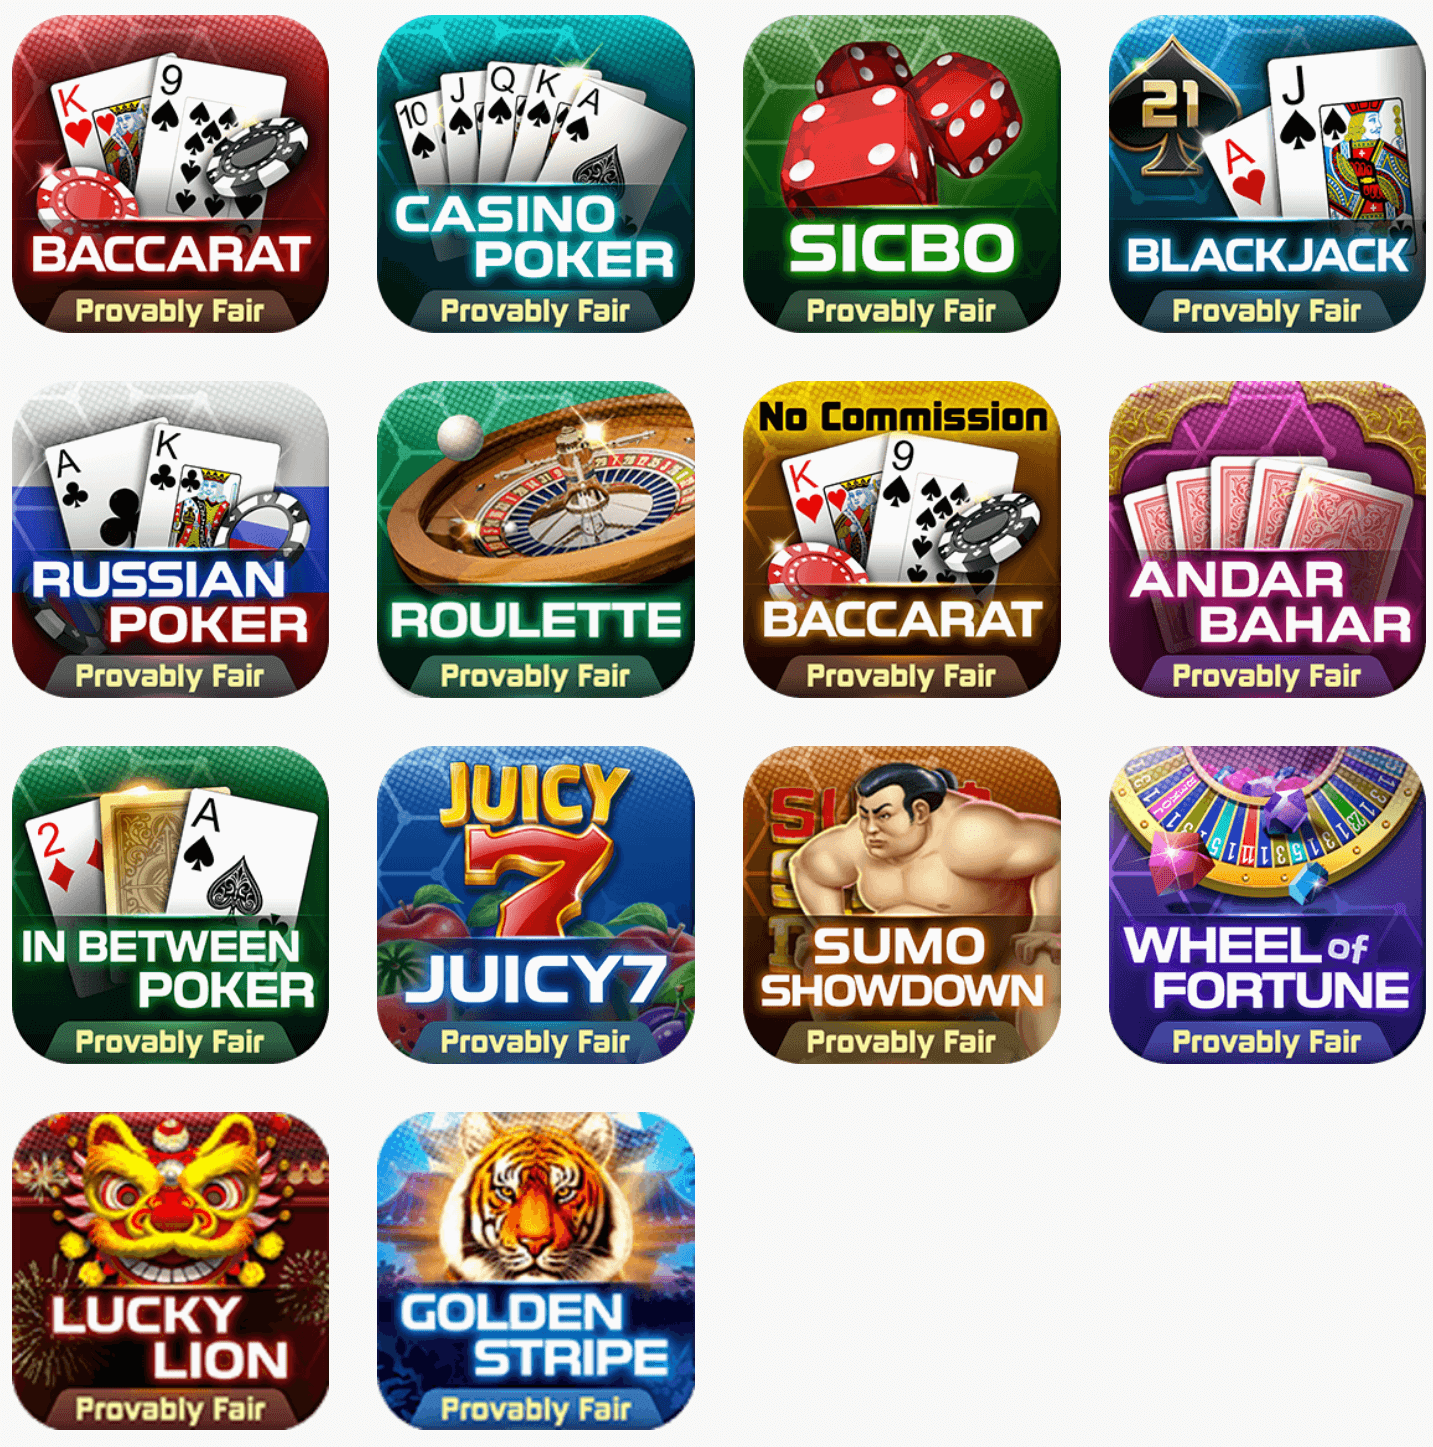 Natural8 casino games overview